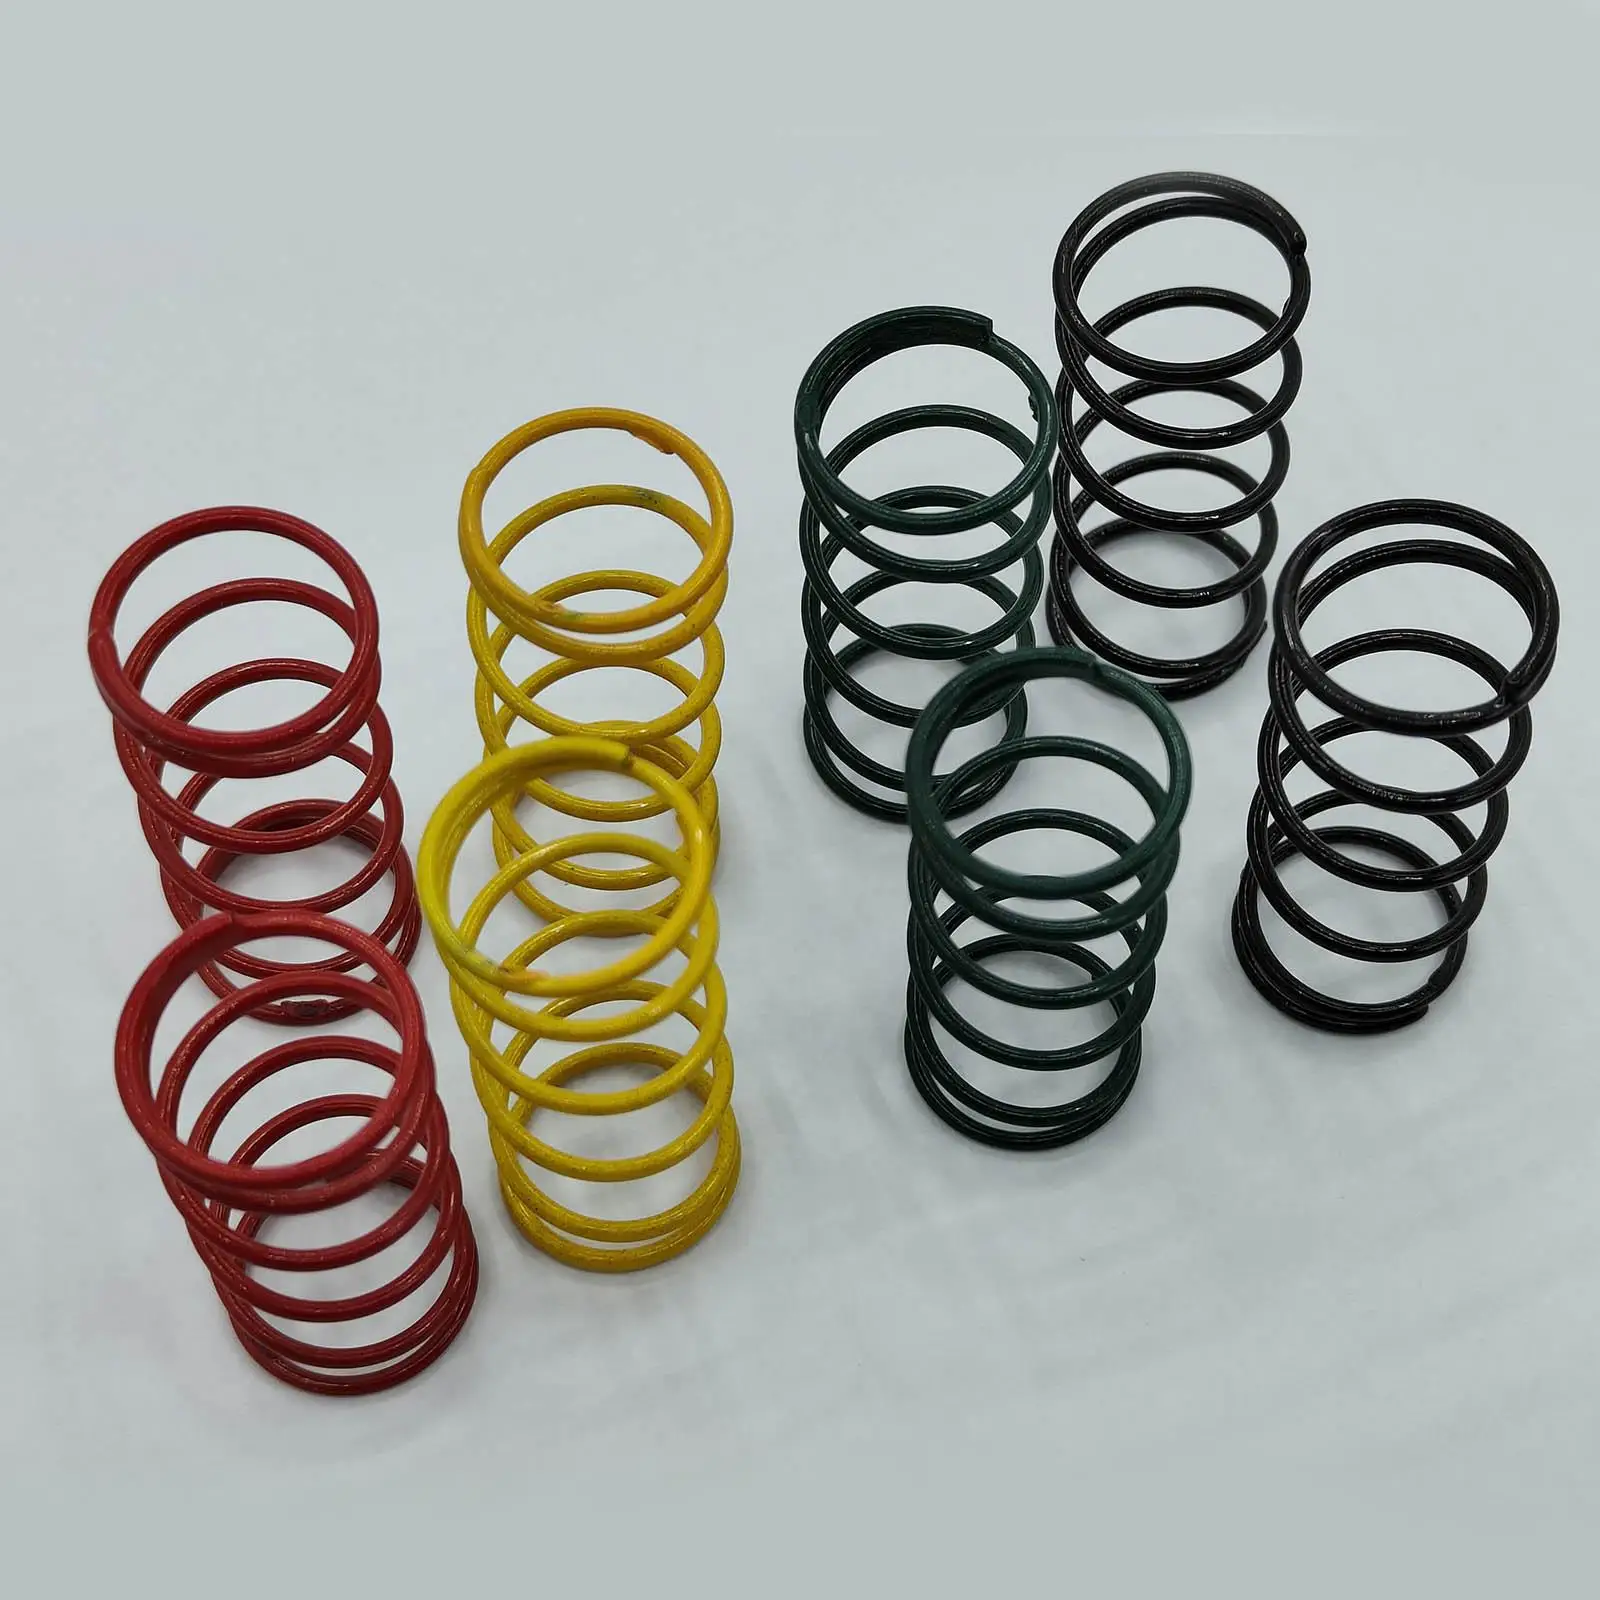 Big Bore Shock Spring Set Shocks Spring for Traxxas for RC Vehicles Truck